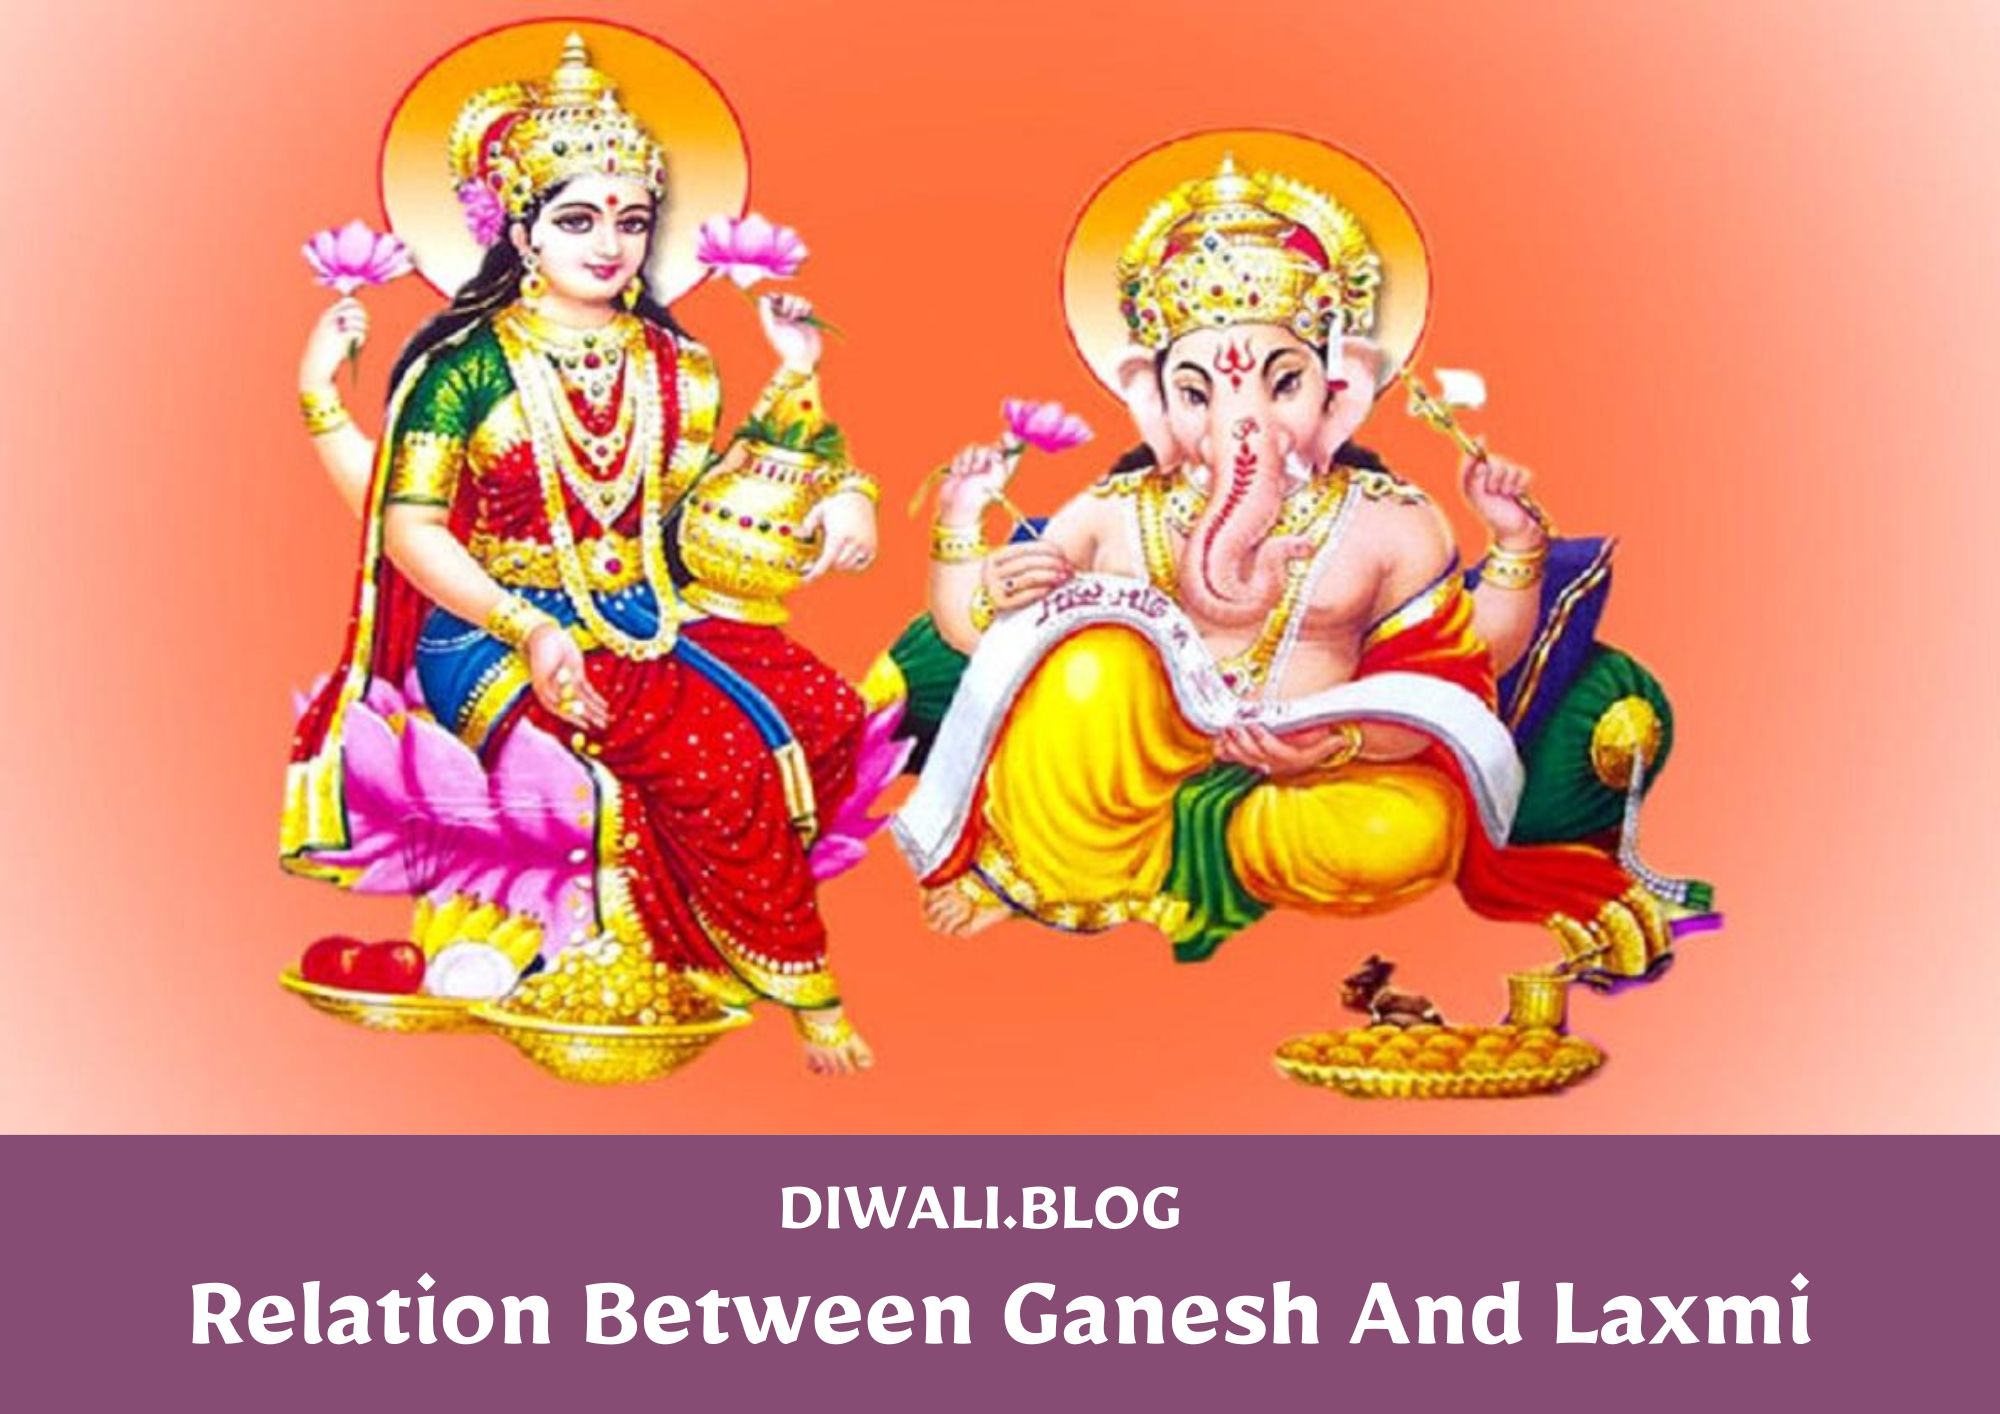 Relation Between Ganesh And Laxmi - Why Lakshmi And Ganesh Are Worshipped Together